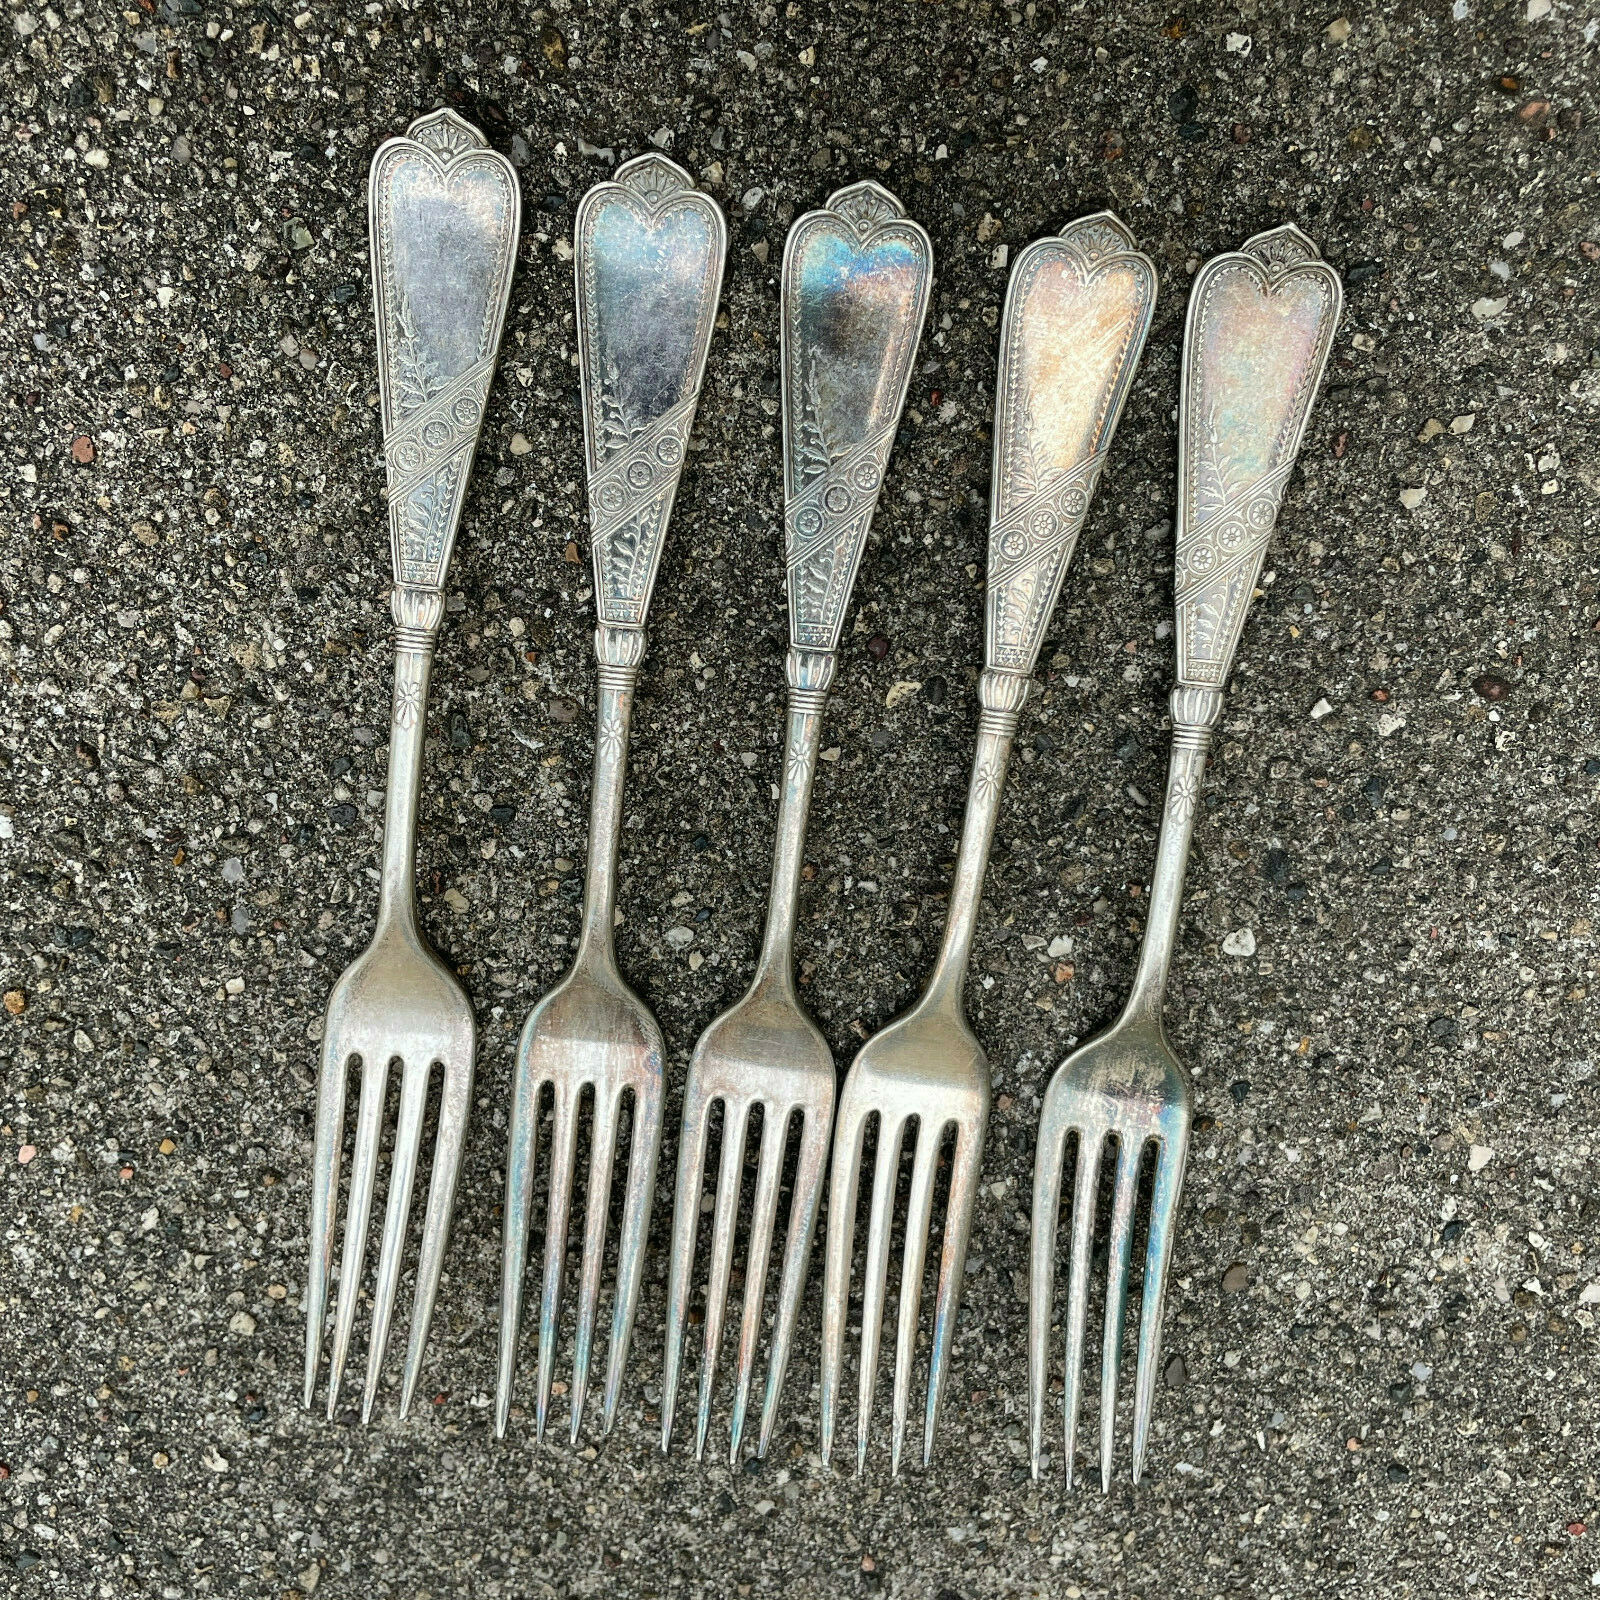 SET of 5 Aesthetic Chicago Newport Silverplate Dinner Forks 1847 Rogers Bros - $43.62